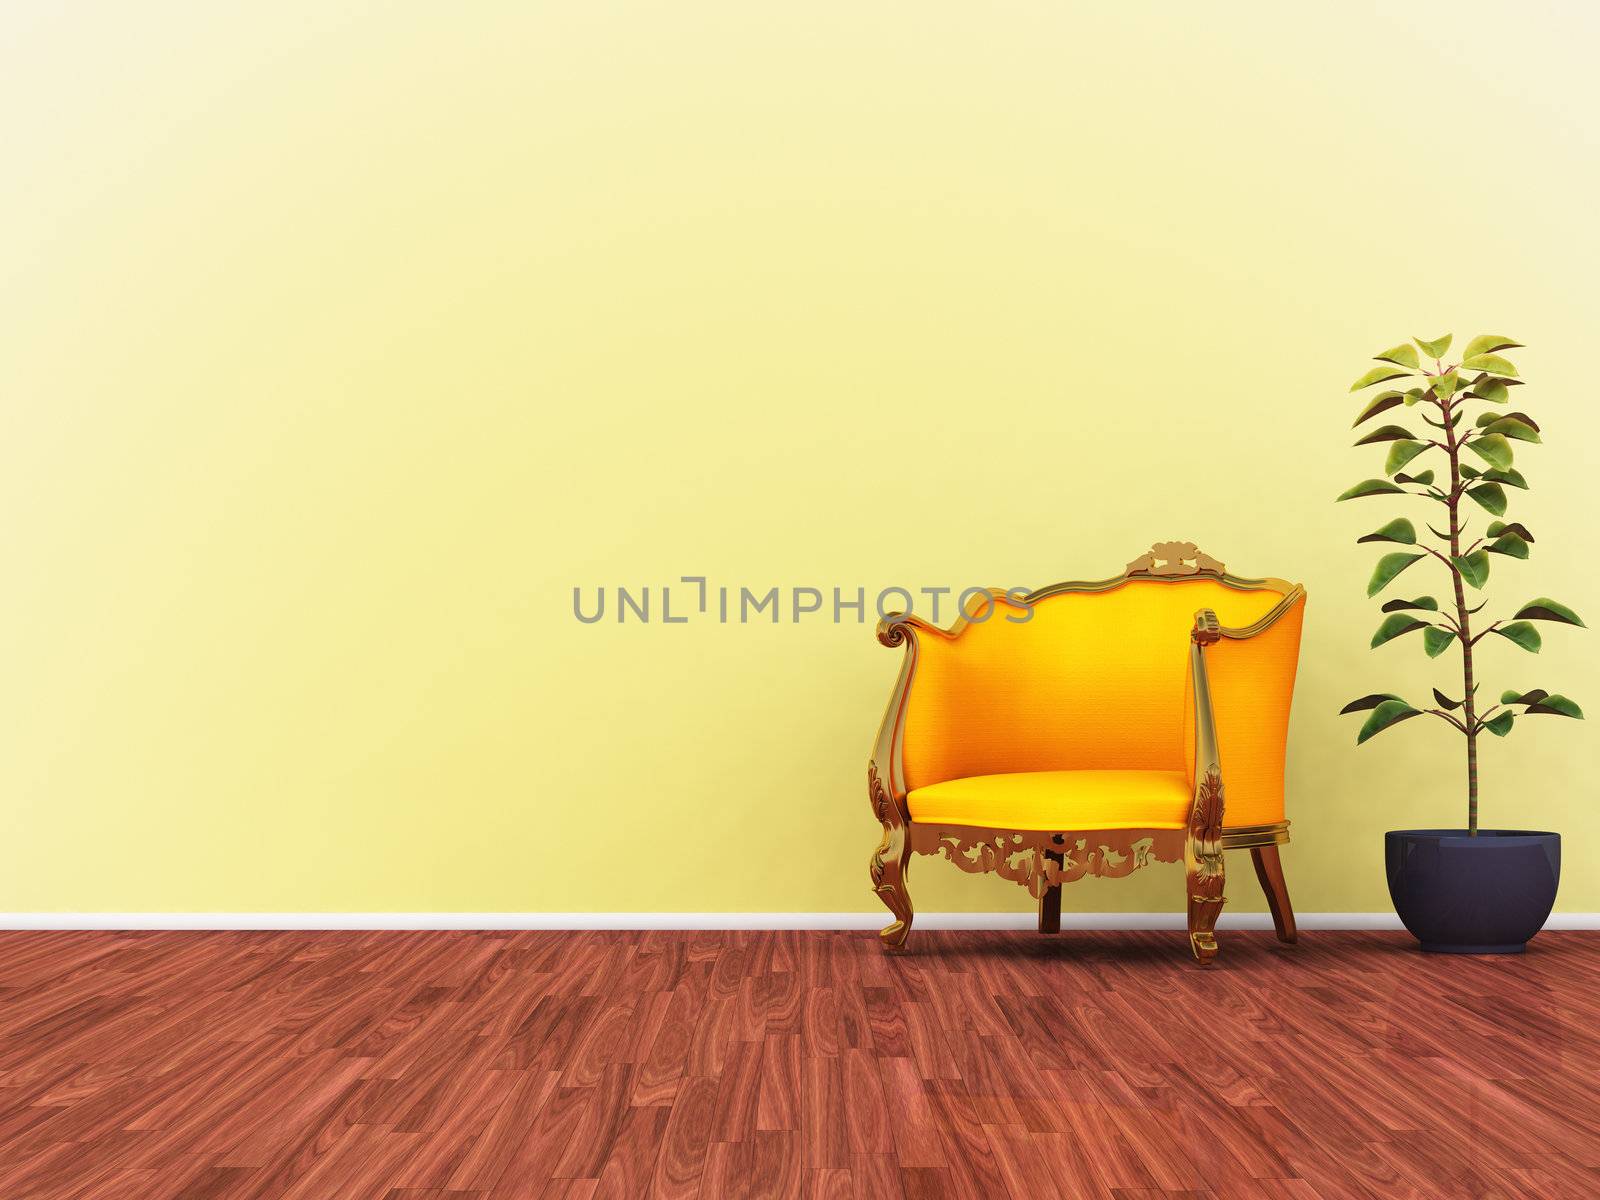 An illustration of a yellow room with a yellow sofa